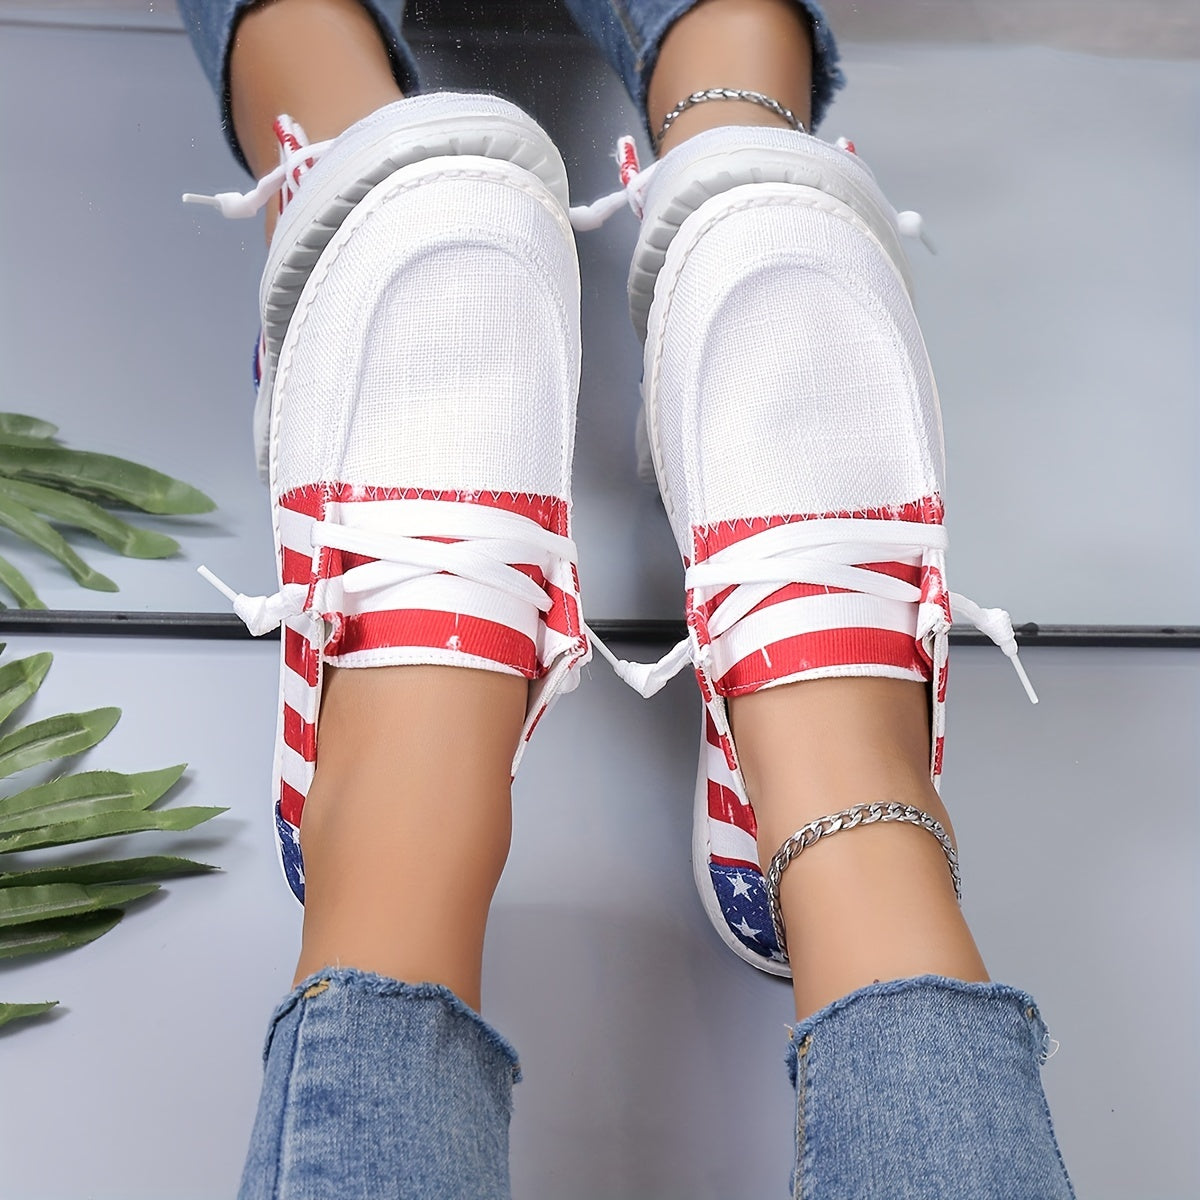 Flag Pattern Canvas Shoes, Lace Up Low Top Flat Sneakers